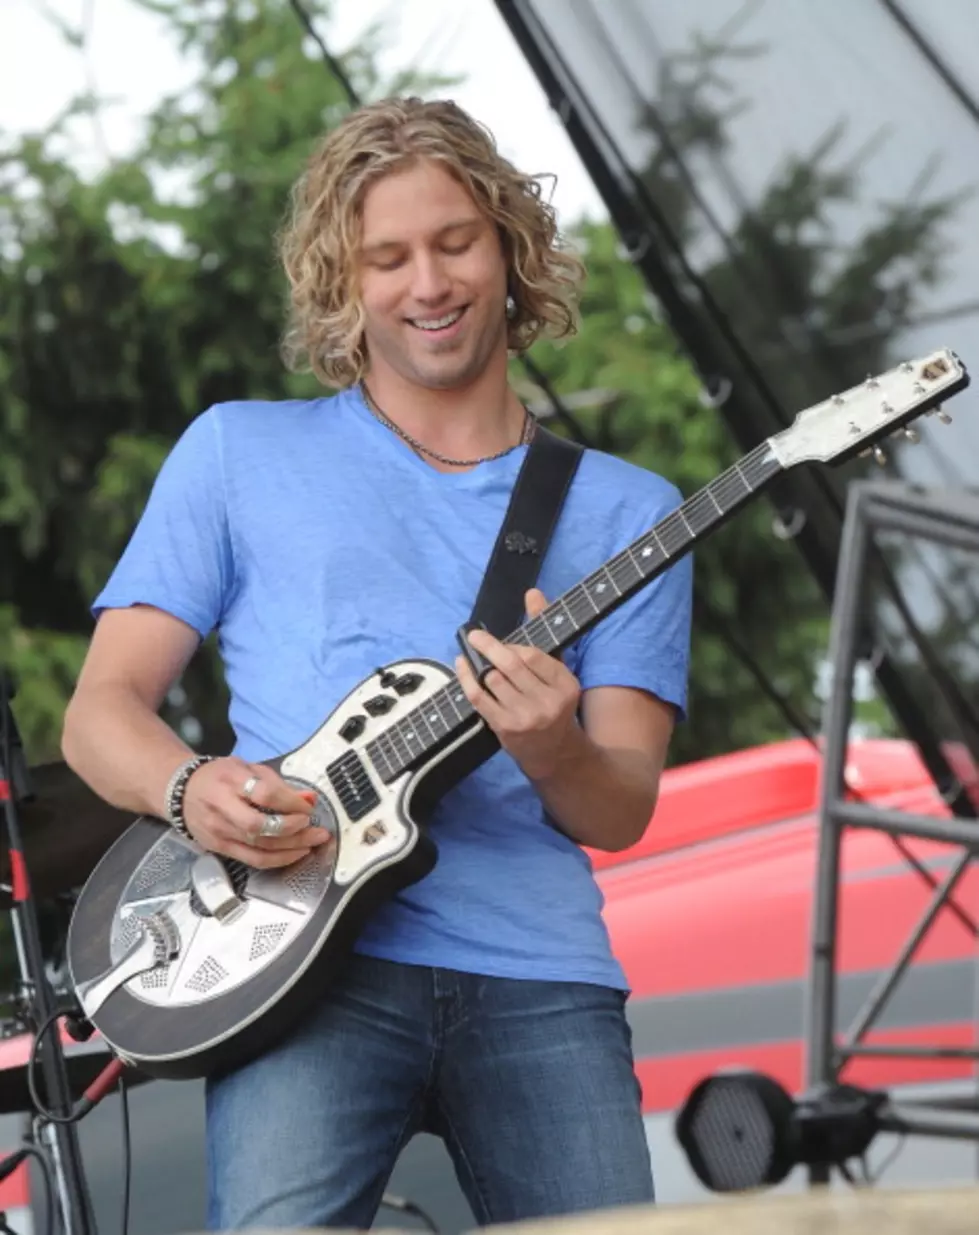 Casey James Fan Tattoos ‘Good Life’ Lyrics On Her Foot [PICTURE]